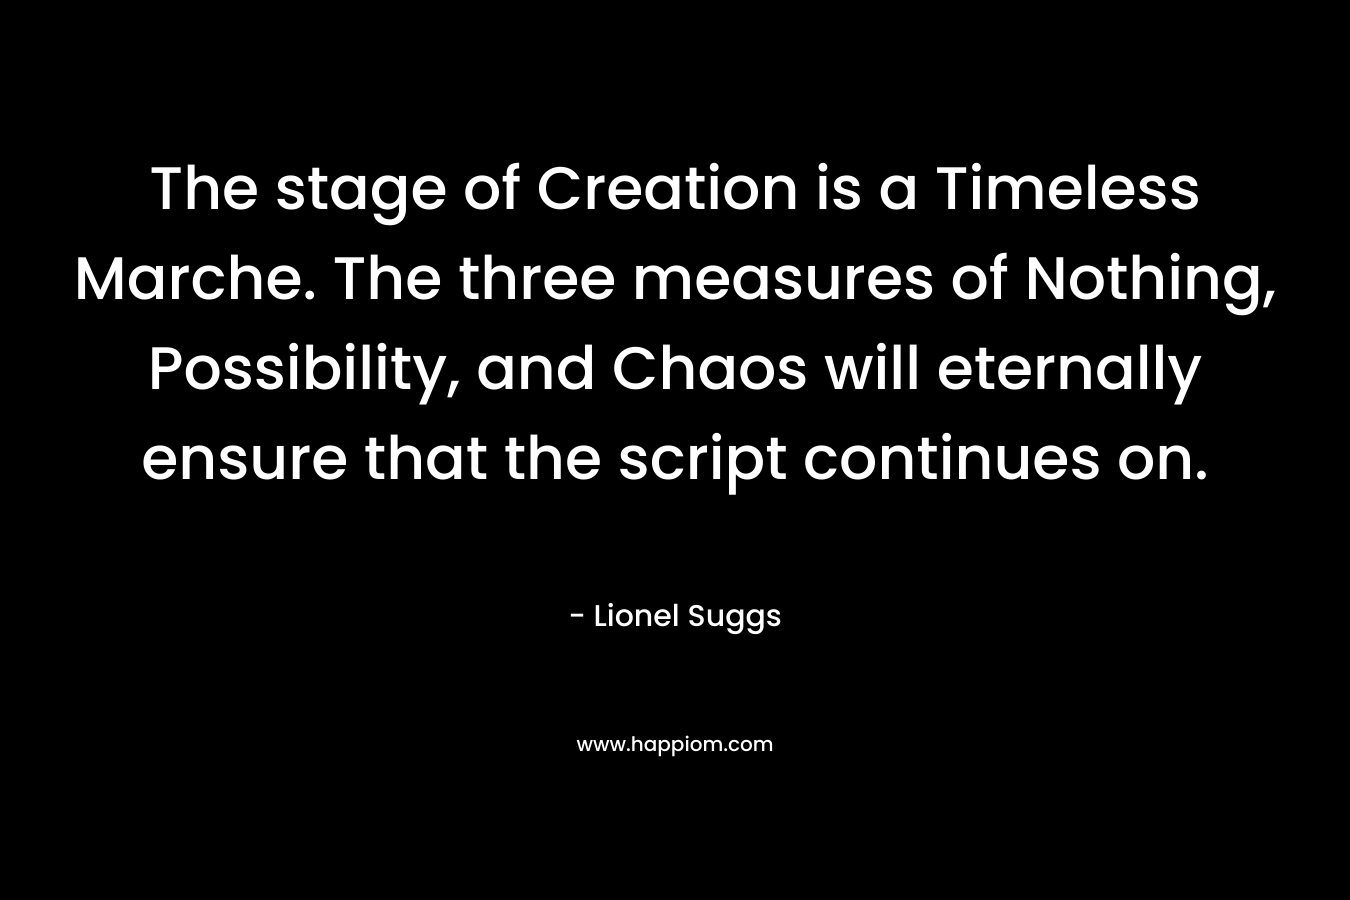 The stage of Creation is a Timeless Marche. The three measures of Nothing, Possibility, and Chaos will eternally ensure that the script continues on. – Lionel Suggs